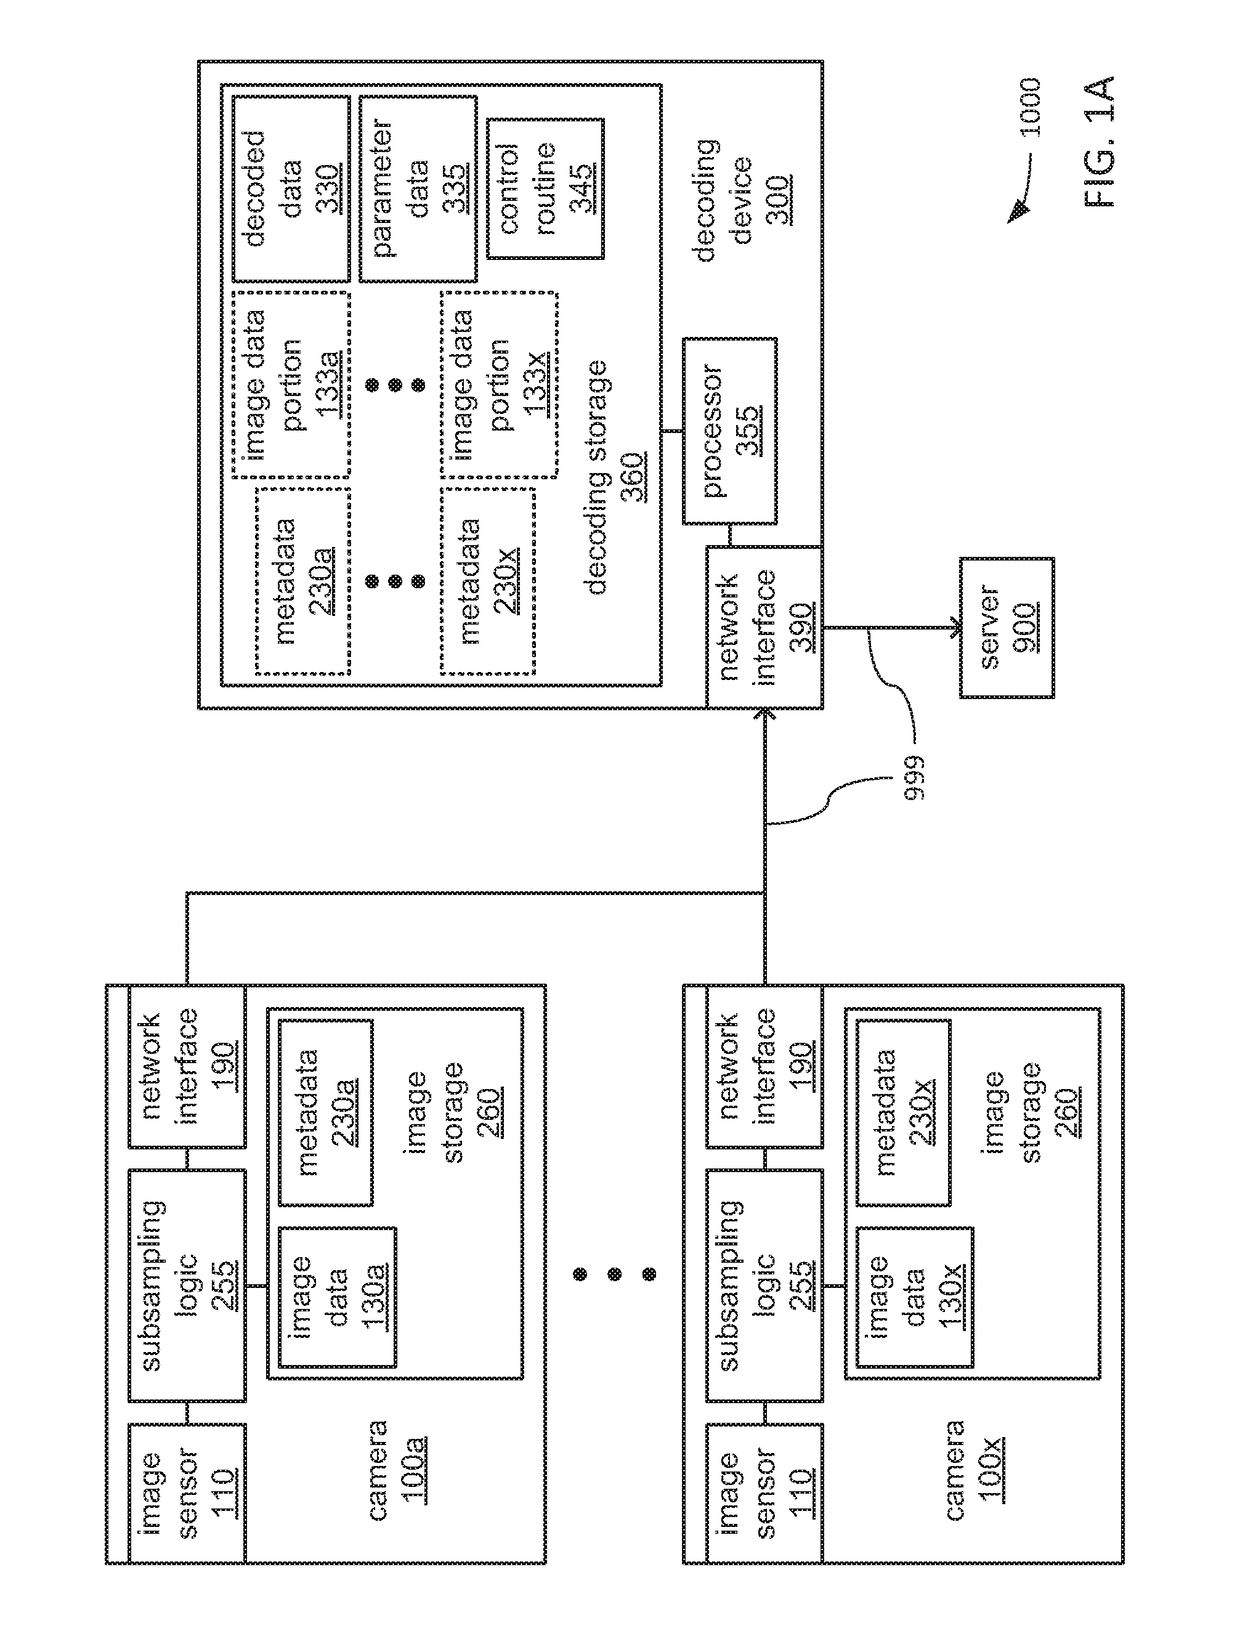 Coded image capture and decoding system